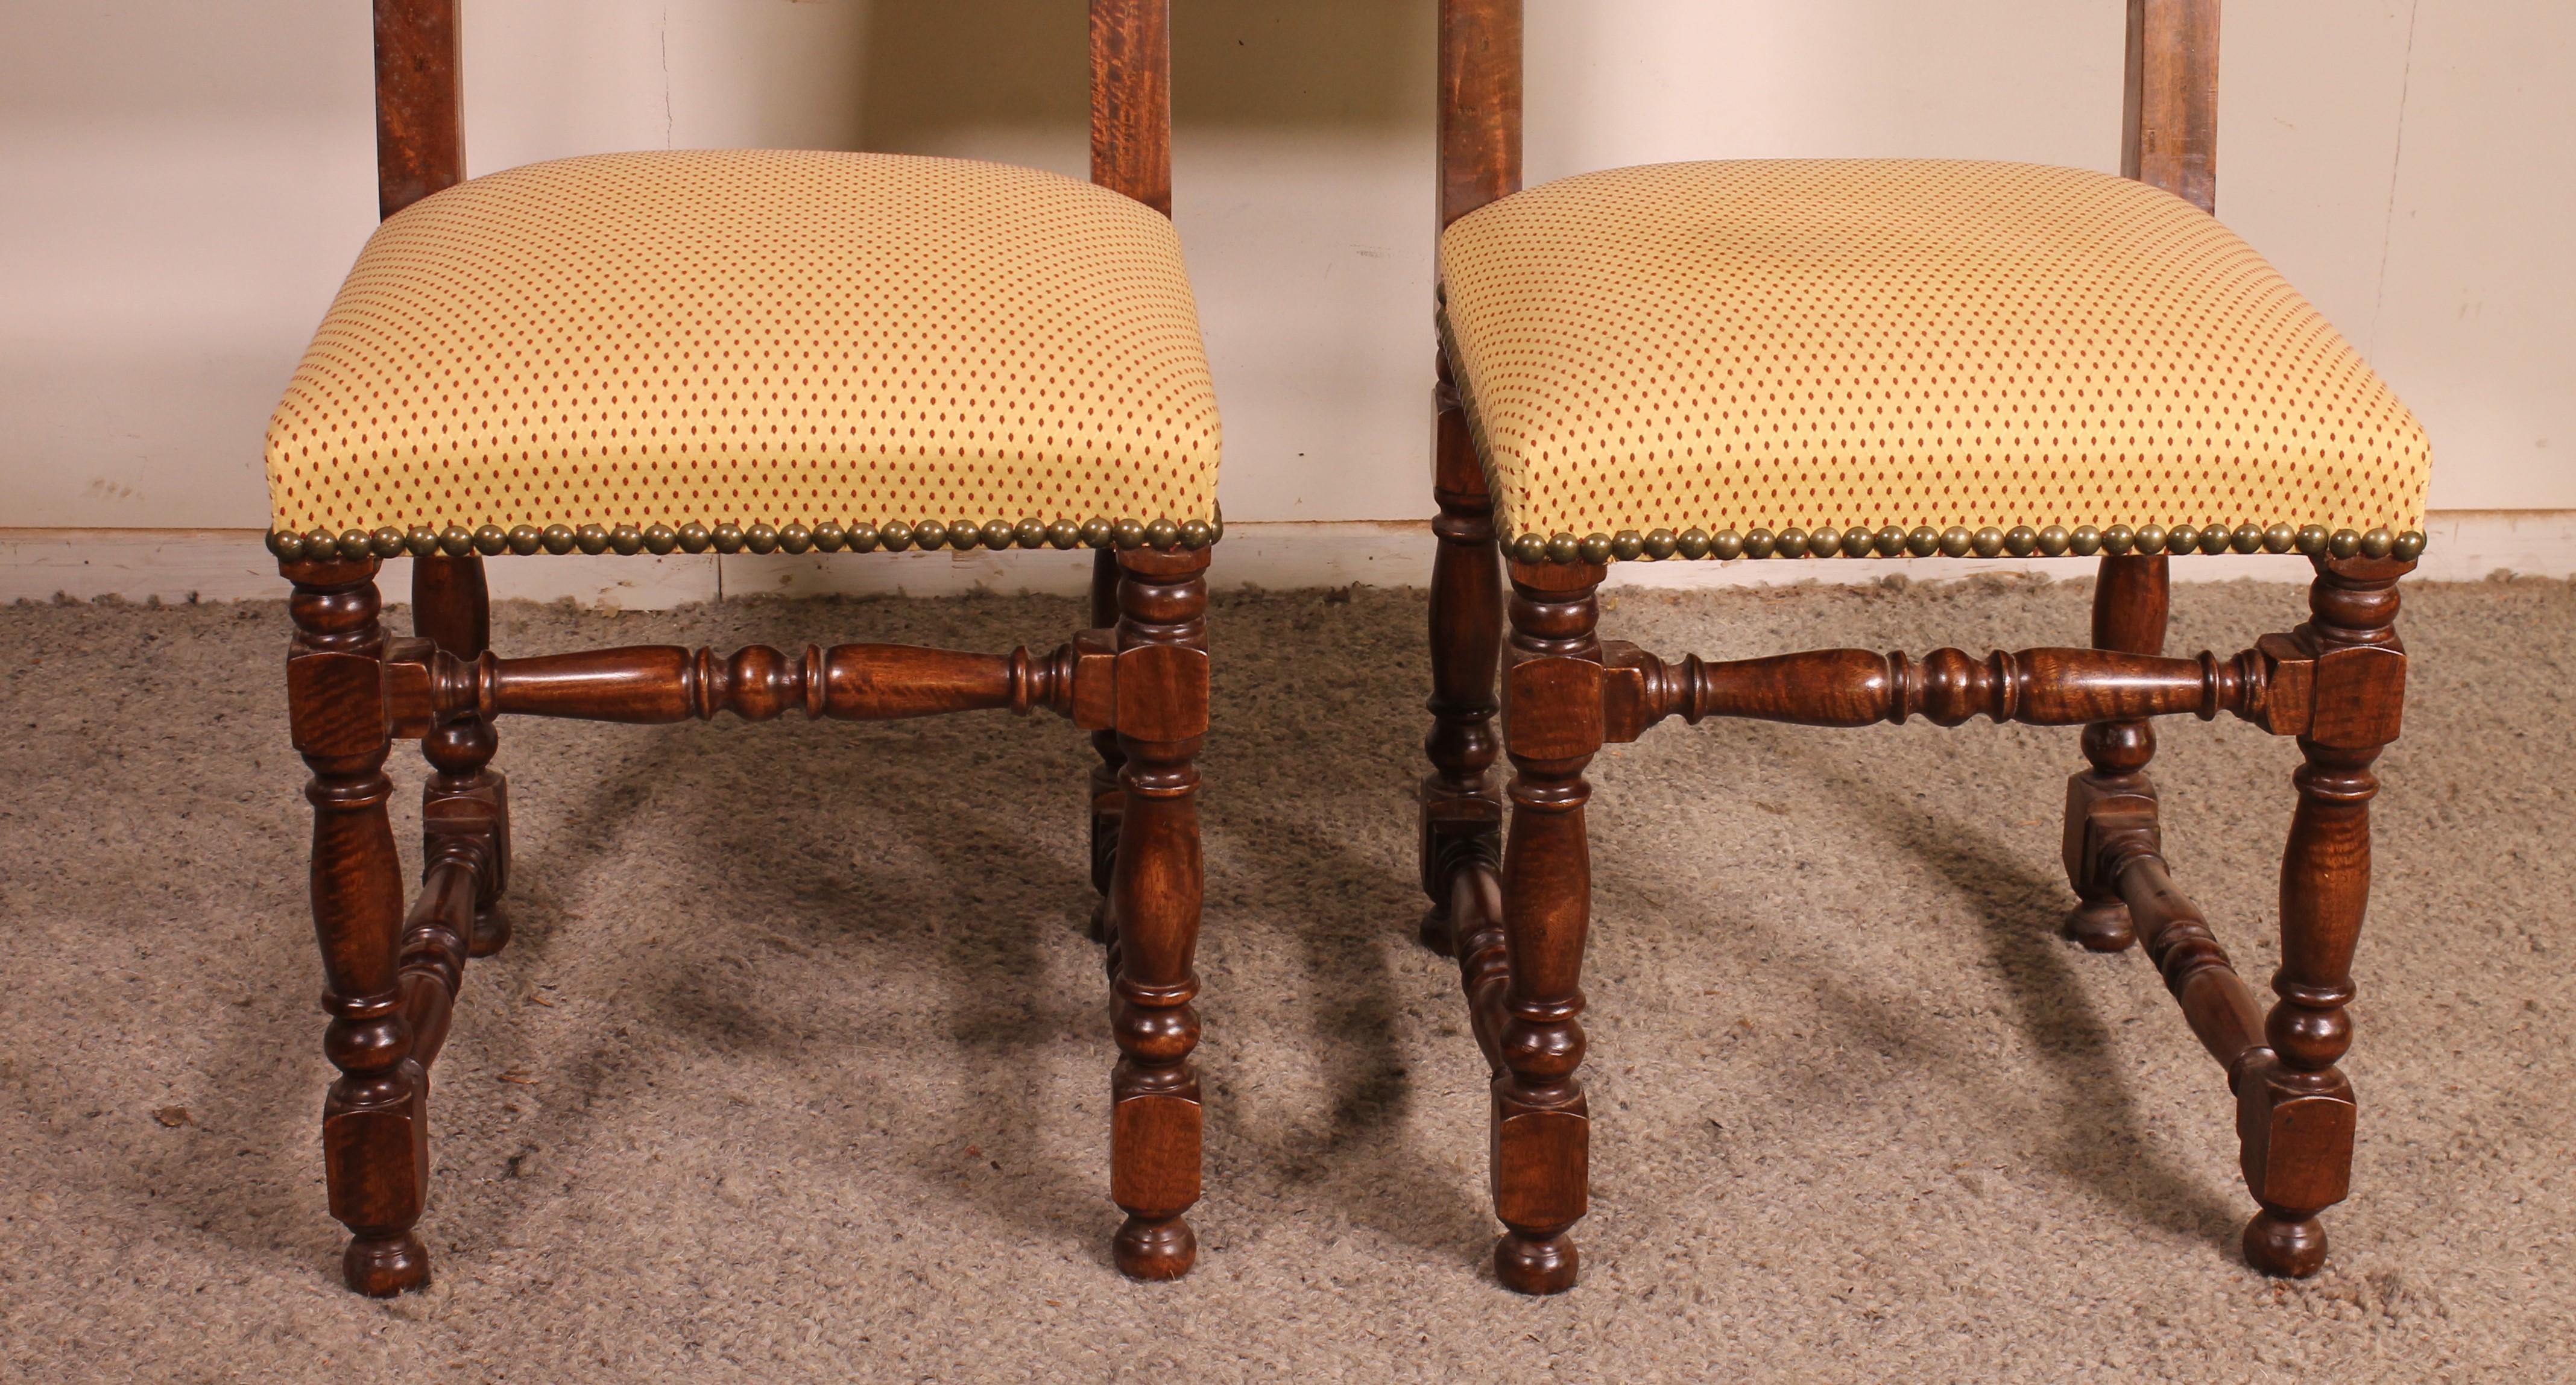 lovely pair of 2 Louis XIII style walnut chairs (20 century) 
The chairs are from France are in perfect condition. The chairs have been checked, repolished and reupholstered by our upholsterer.

The chairs are very comfortable and have a good